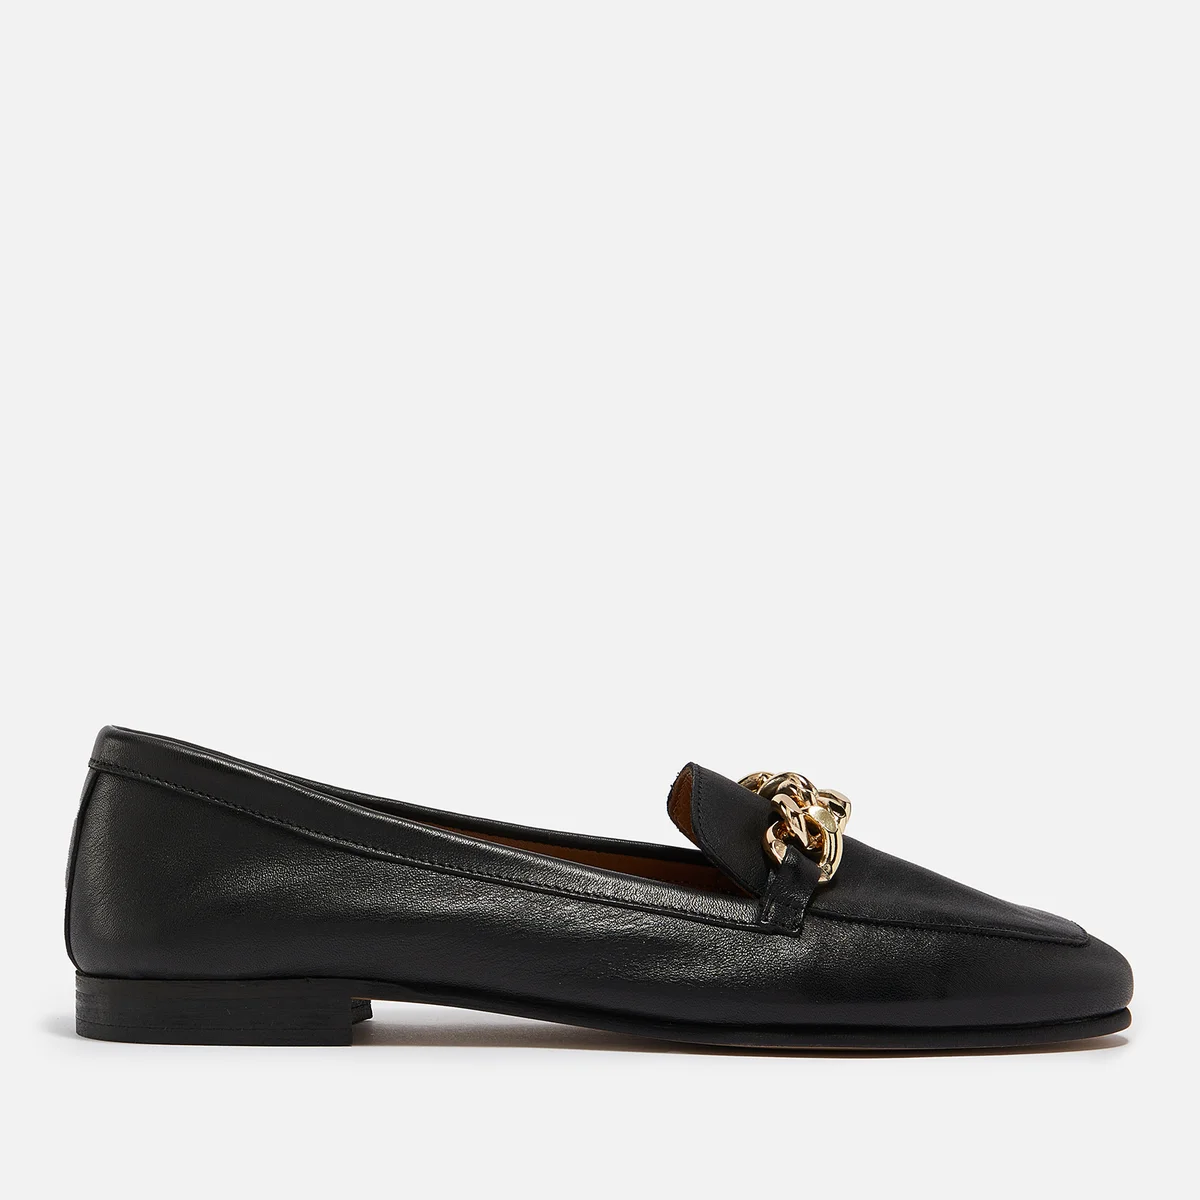 Dune Women's Goldsmith Chain-Embellished Leather Loafers Image 1